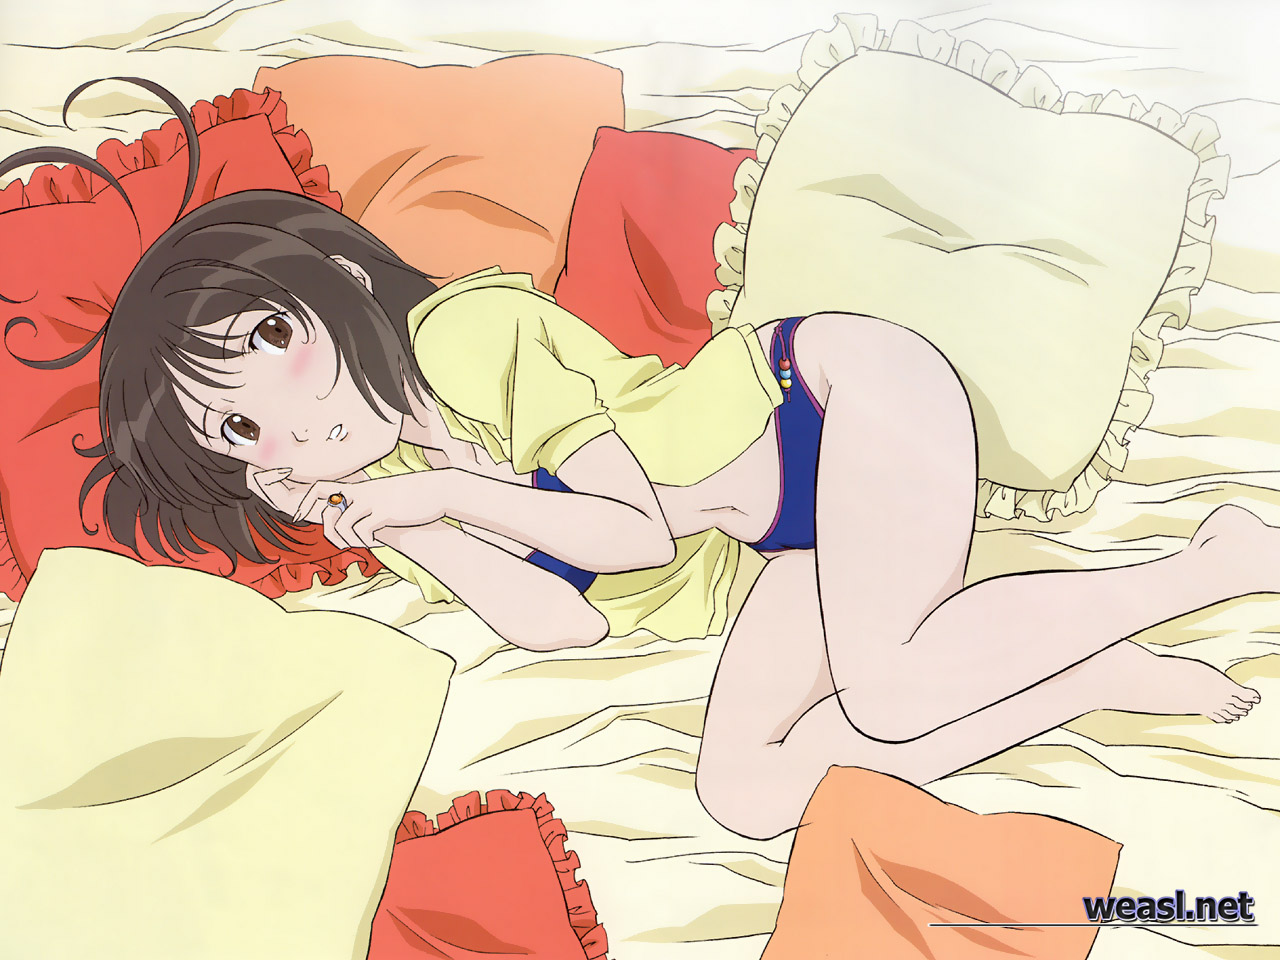 Download High quality Somdays Dreamers wallpaper / Anime / 1280x960